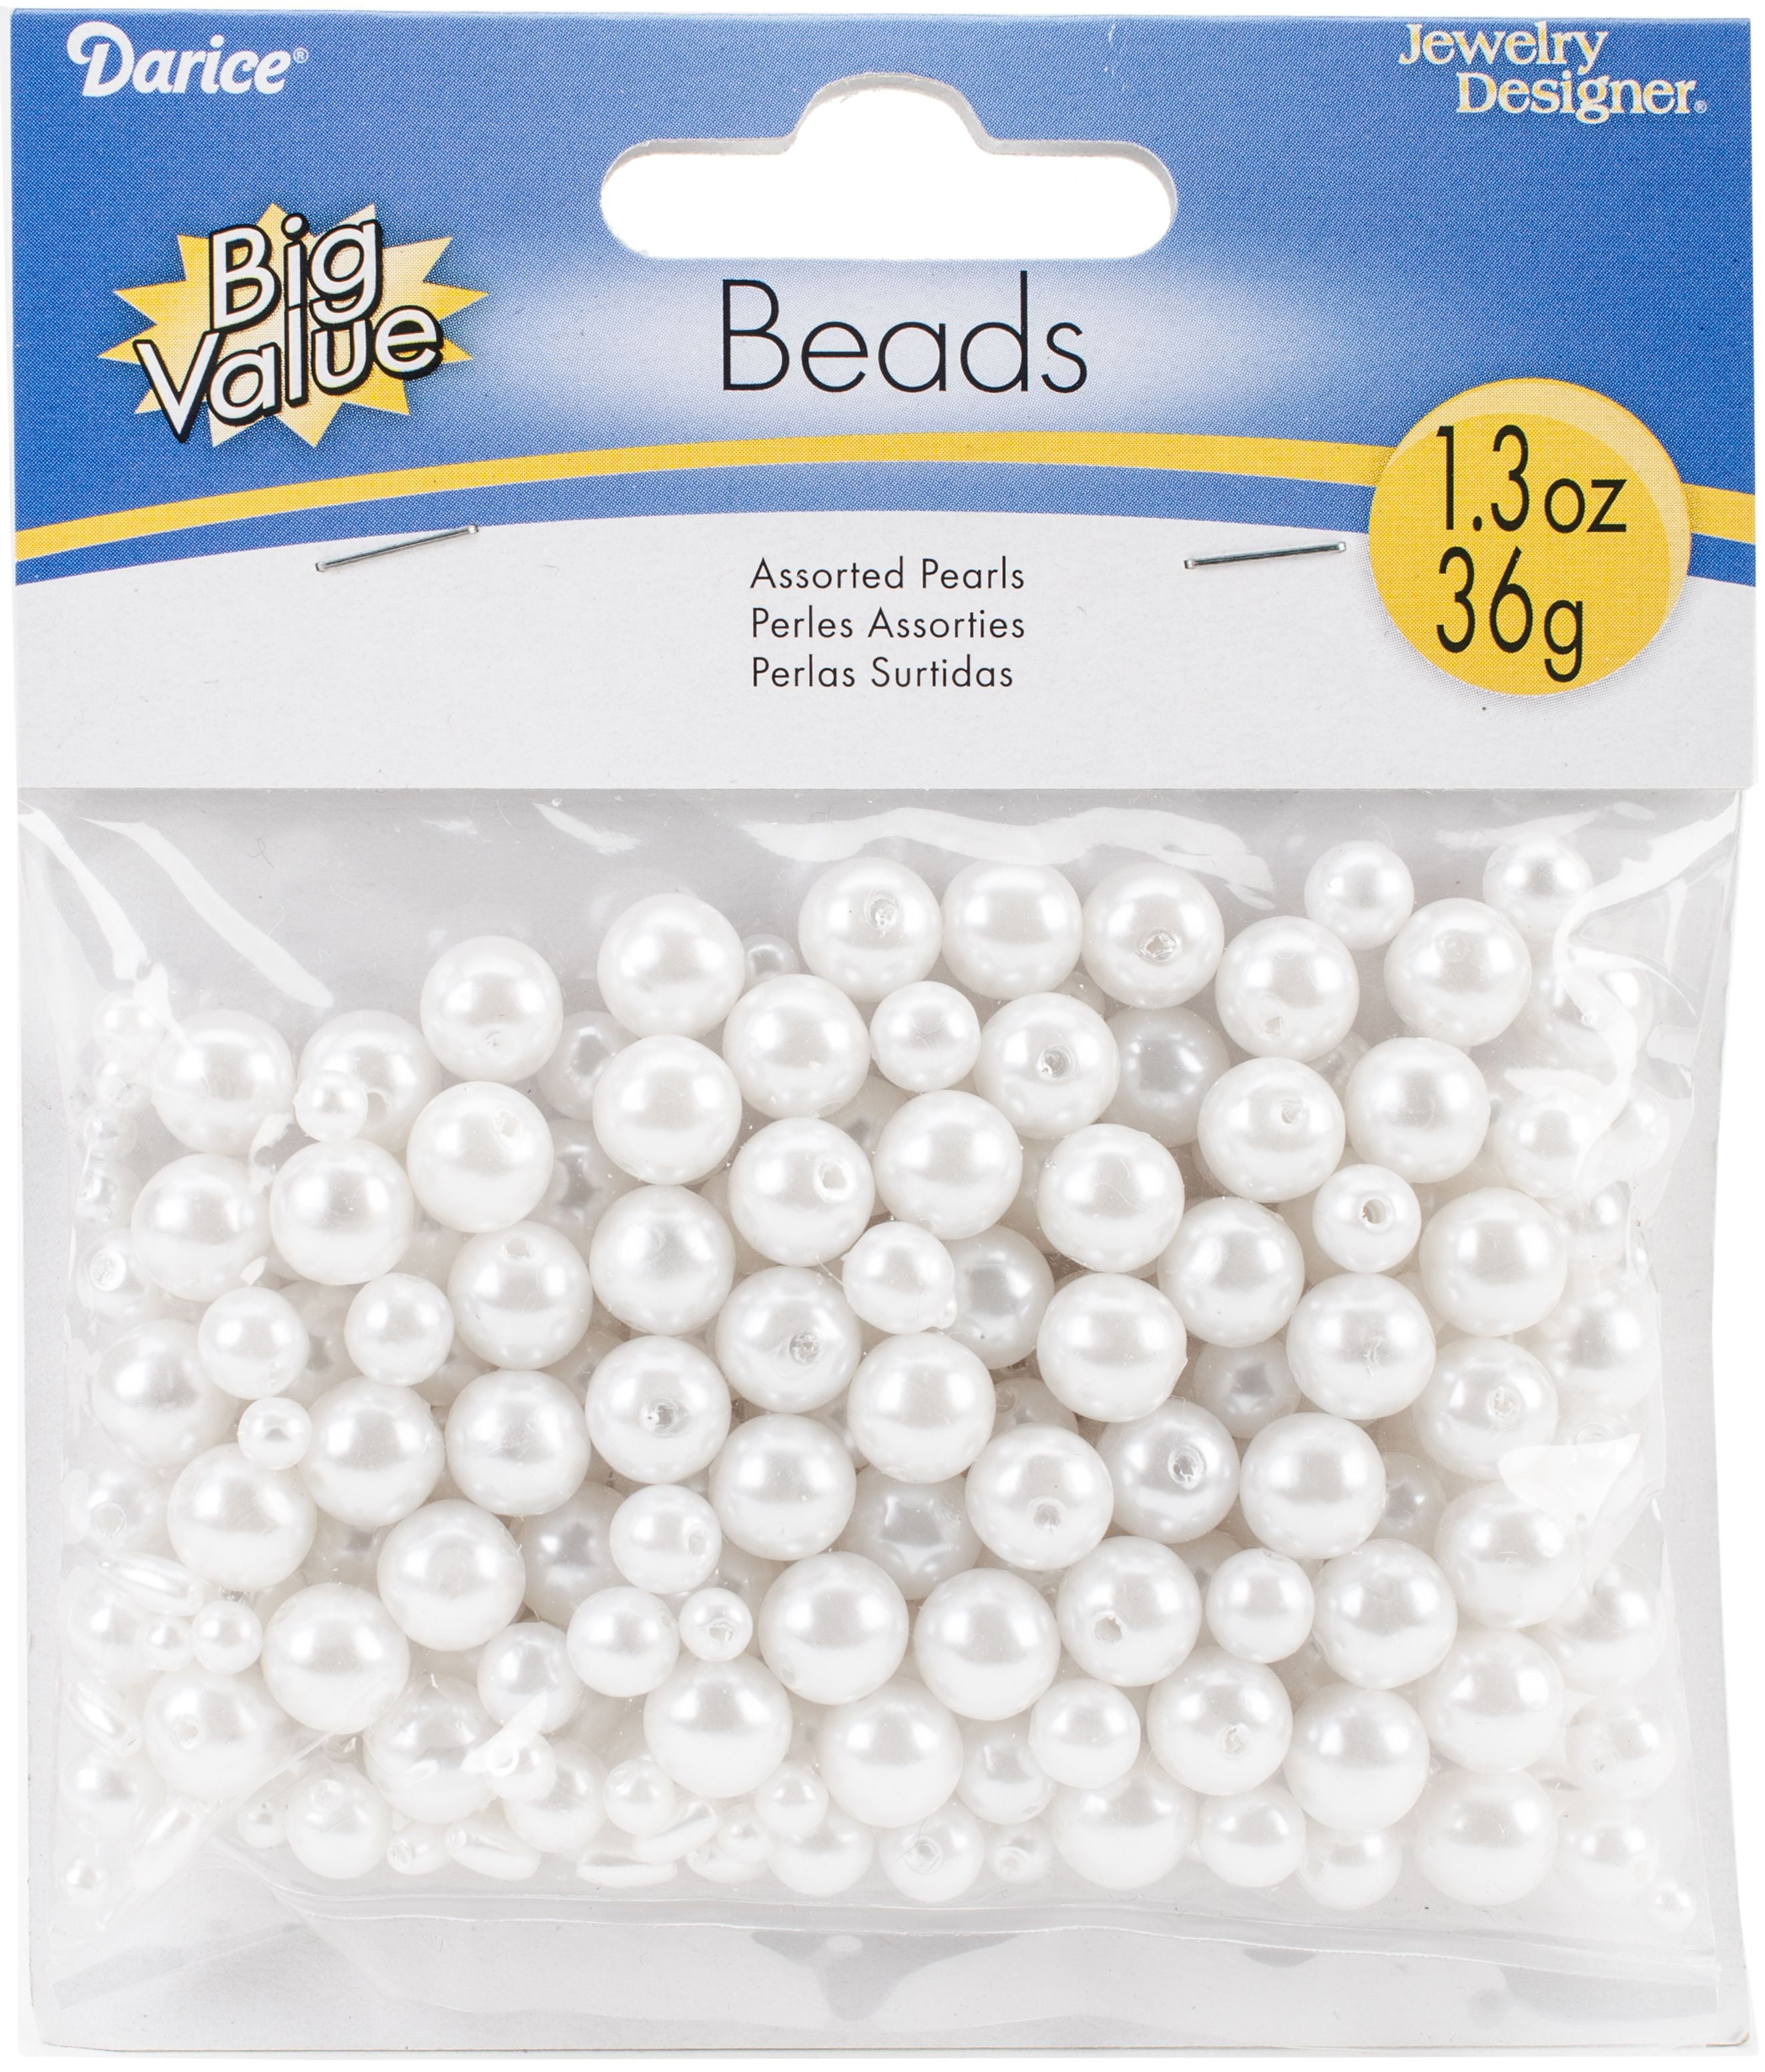 720 Pieces of Pearl Beads for Crafts, 8MM Round Pearls Beads with Holes for  Jewelry Making Handcrafted Loose Spacer Beads for DIY Crafts Jewelry